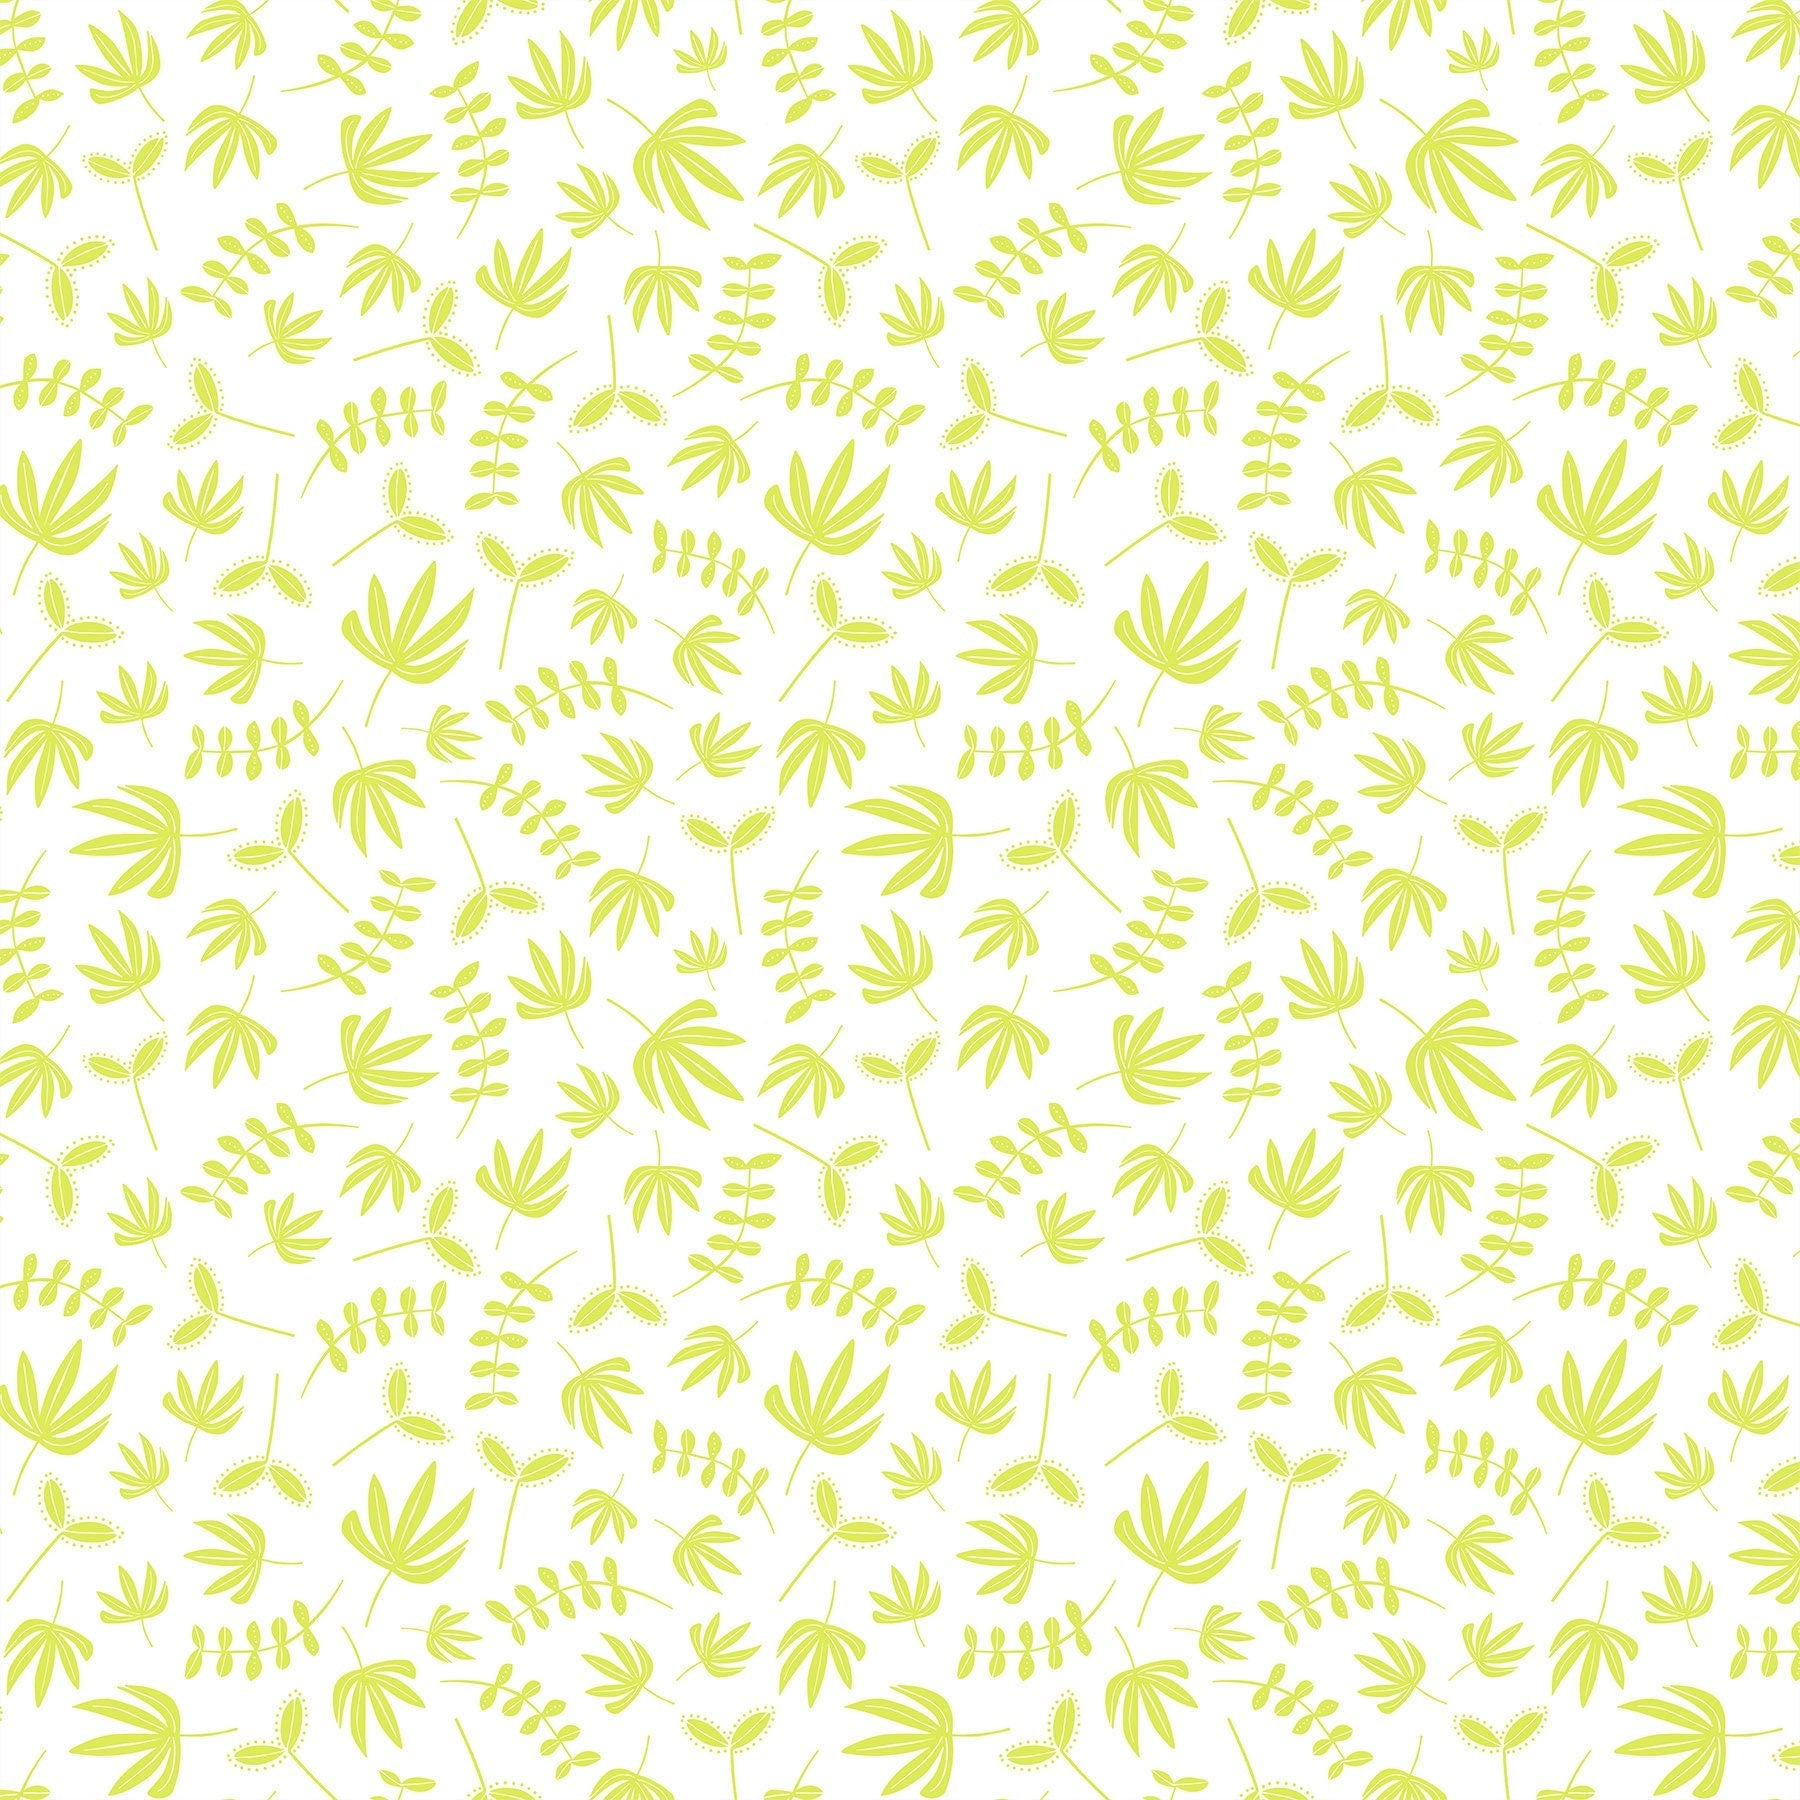 Handstitched - Sun Paper - Chartreuse - homesewn